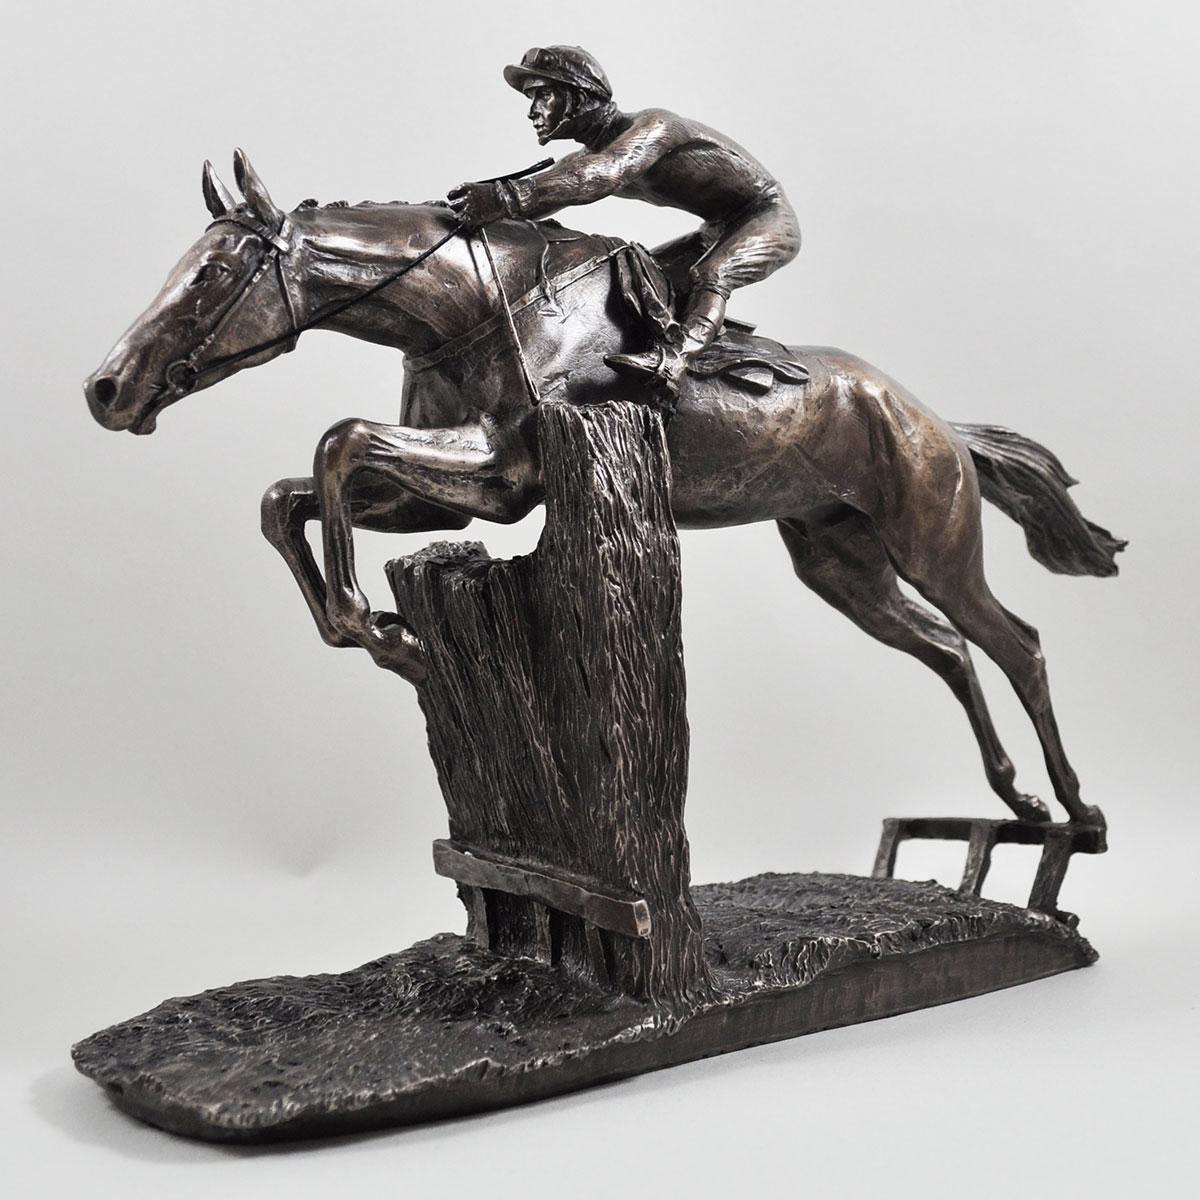 At Full Stretch Horse Racing Large Figurine (David Geenty